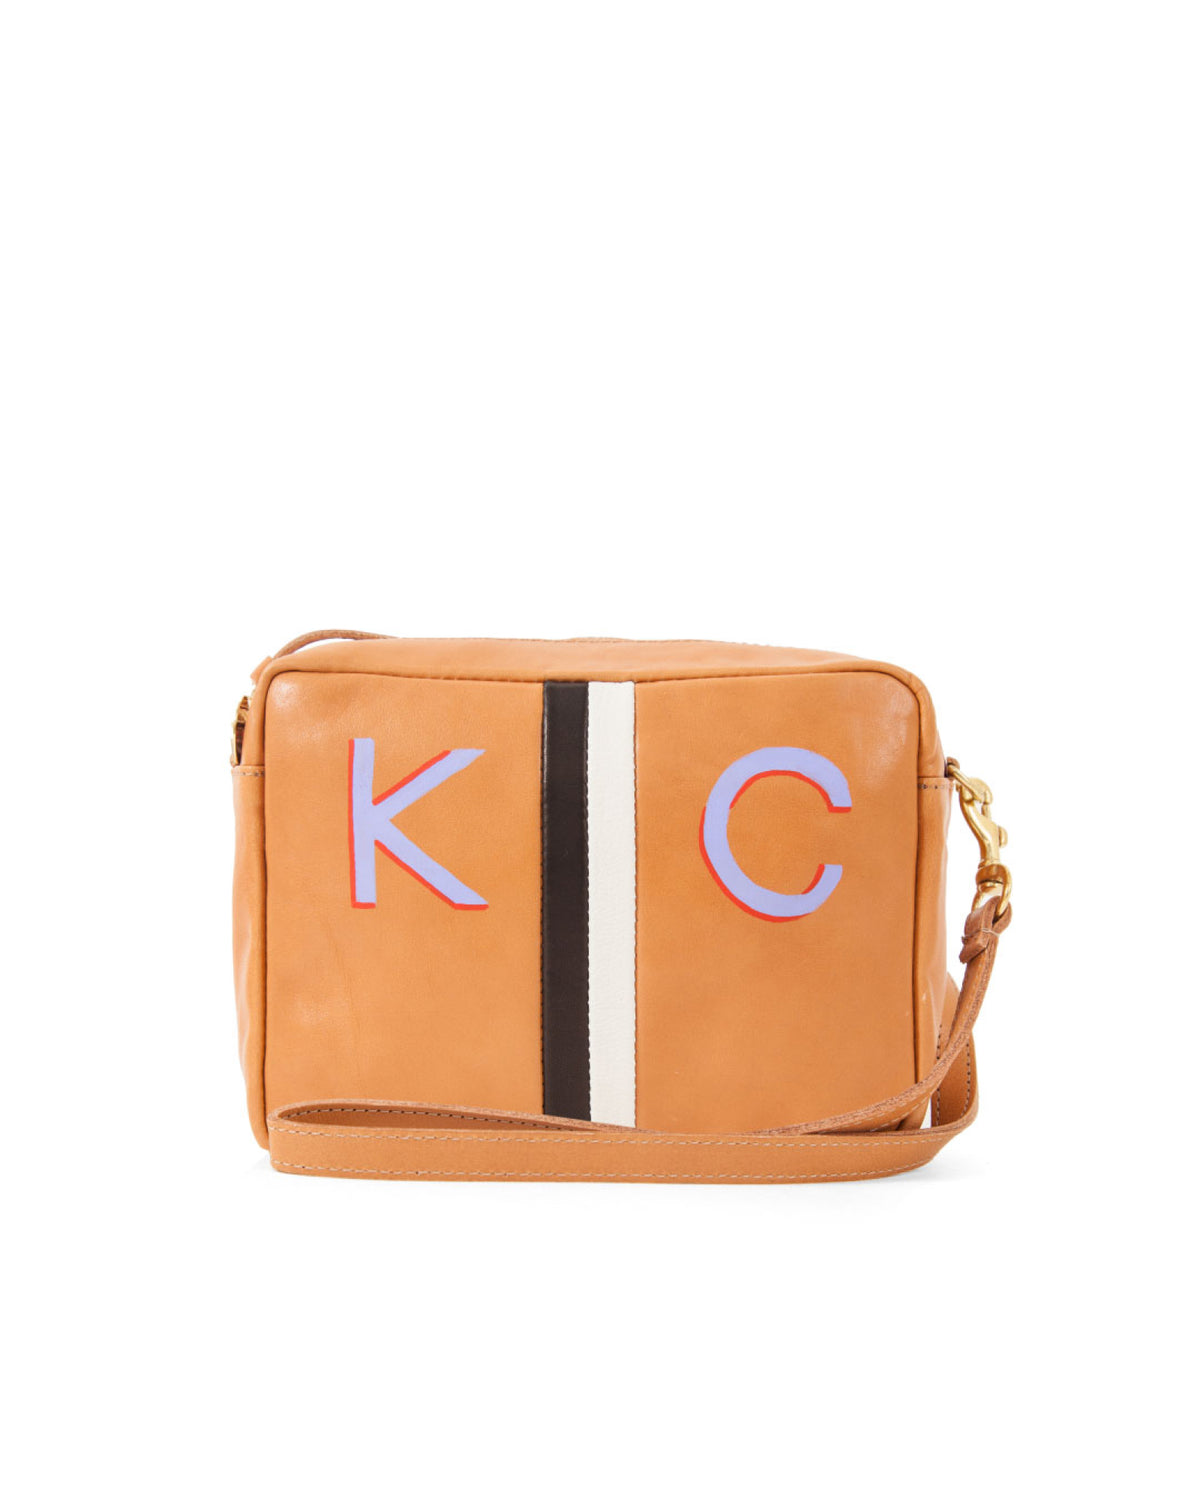 Natural with Black and White Stripes Midi Sac With 2 Inch Hand Painted Letters, Top Center Monogram Placement